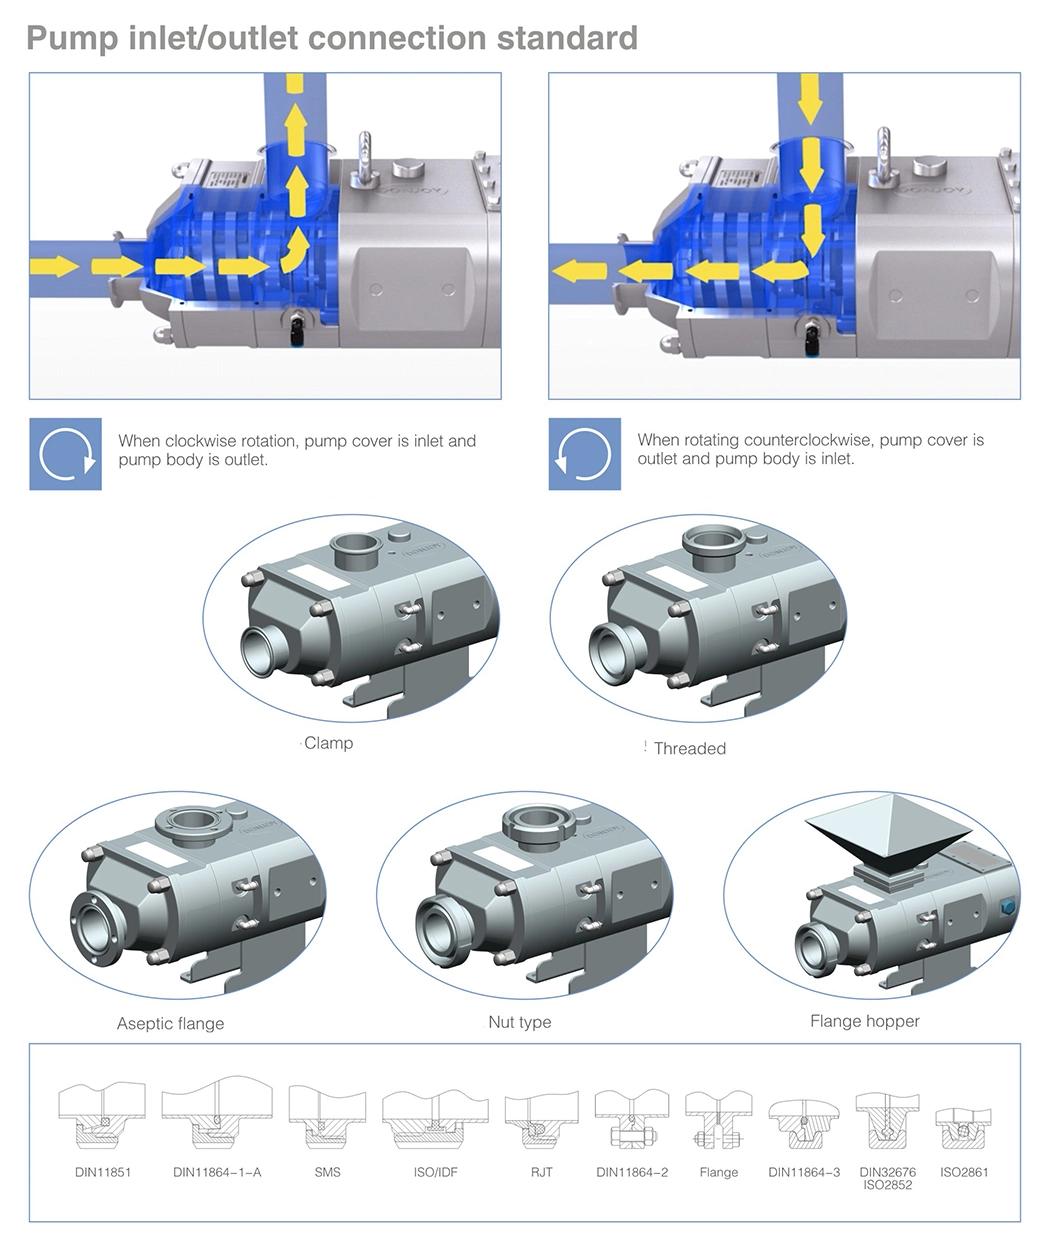 3A Certified Food Grade Twin Screw Pump for Food Beverage Processing